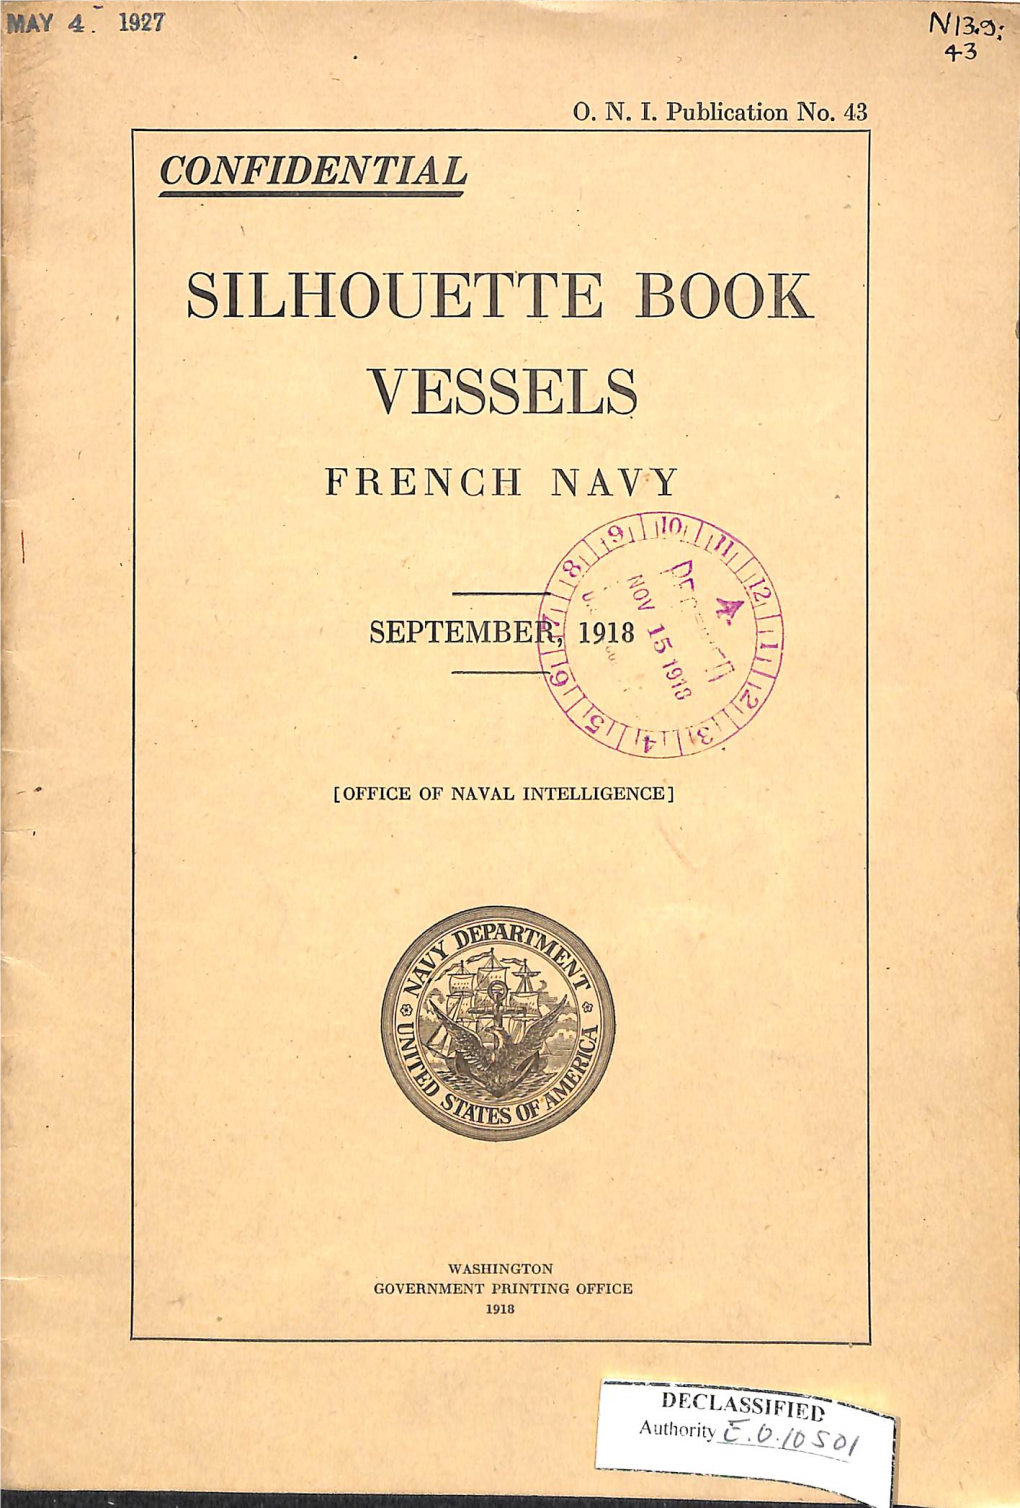 No. 43 Silhouette Book Vessels French